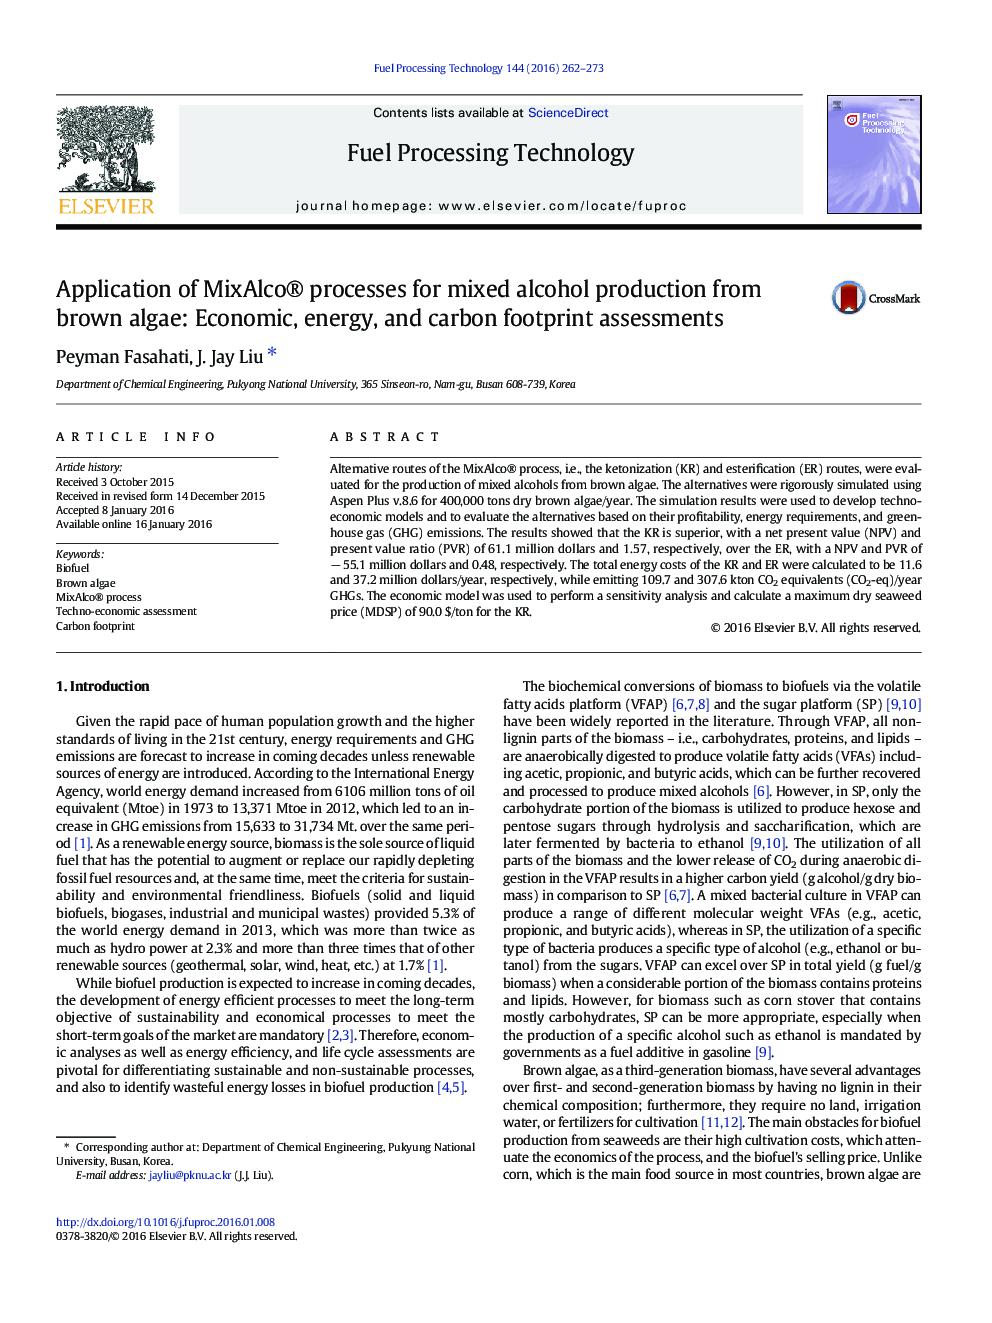 Application of MixAlco® processes for mixed alcohol production from brown algae: Economic, energy, and carbon footprint assessments